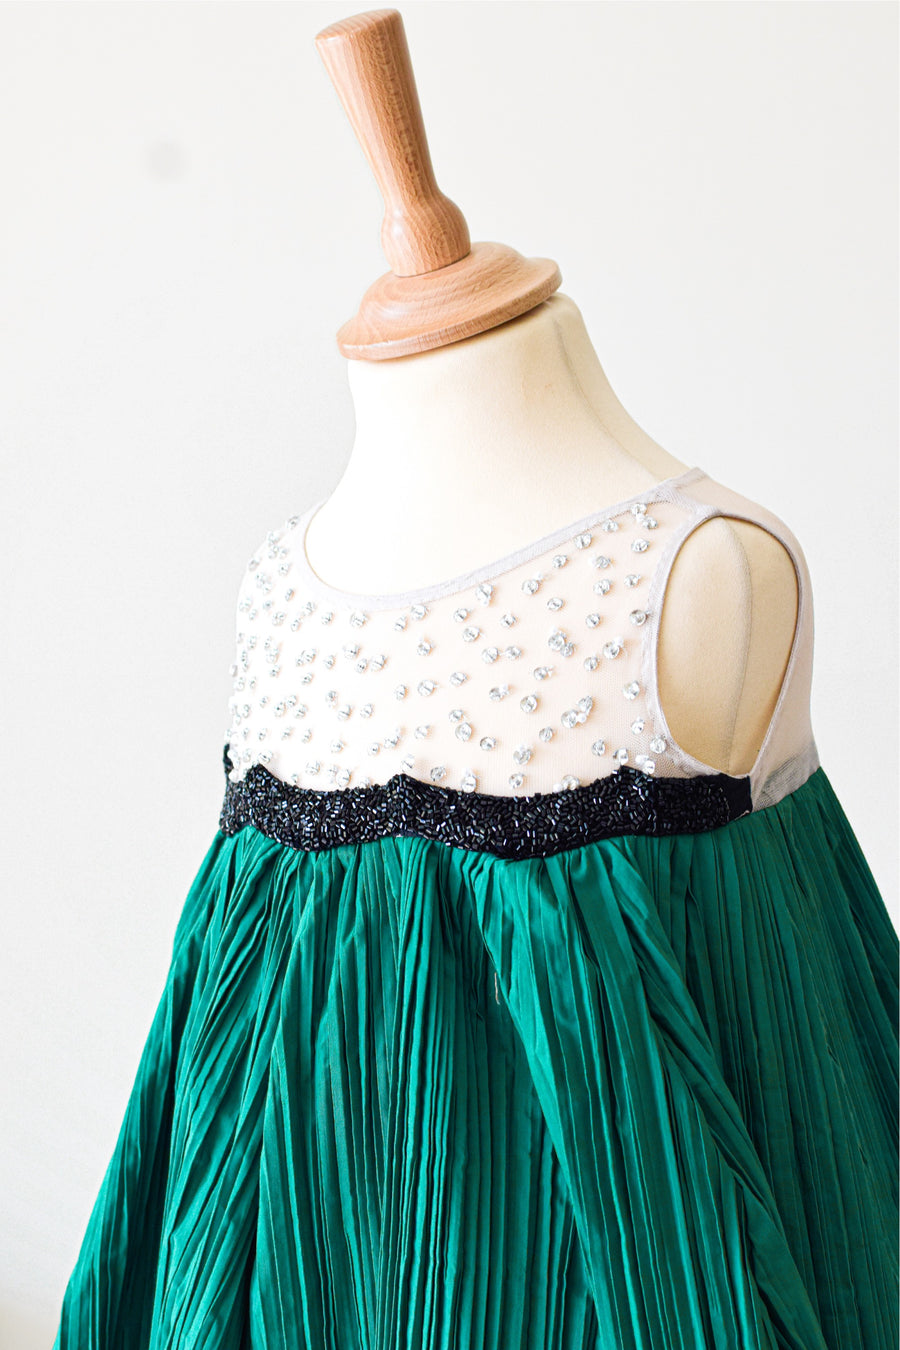 Scalloped Bodice With Pleated Panel Skirt